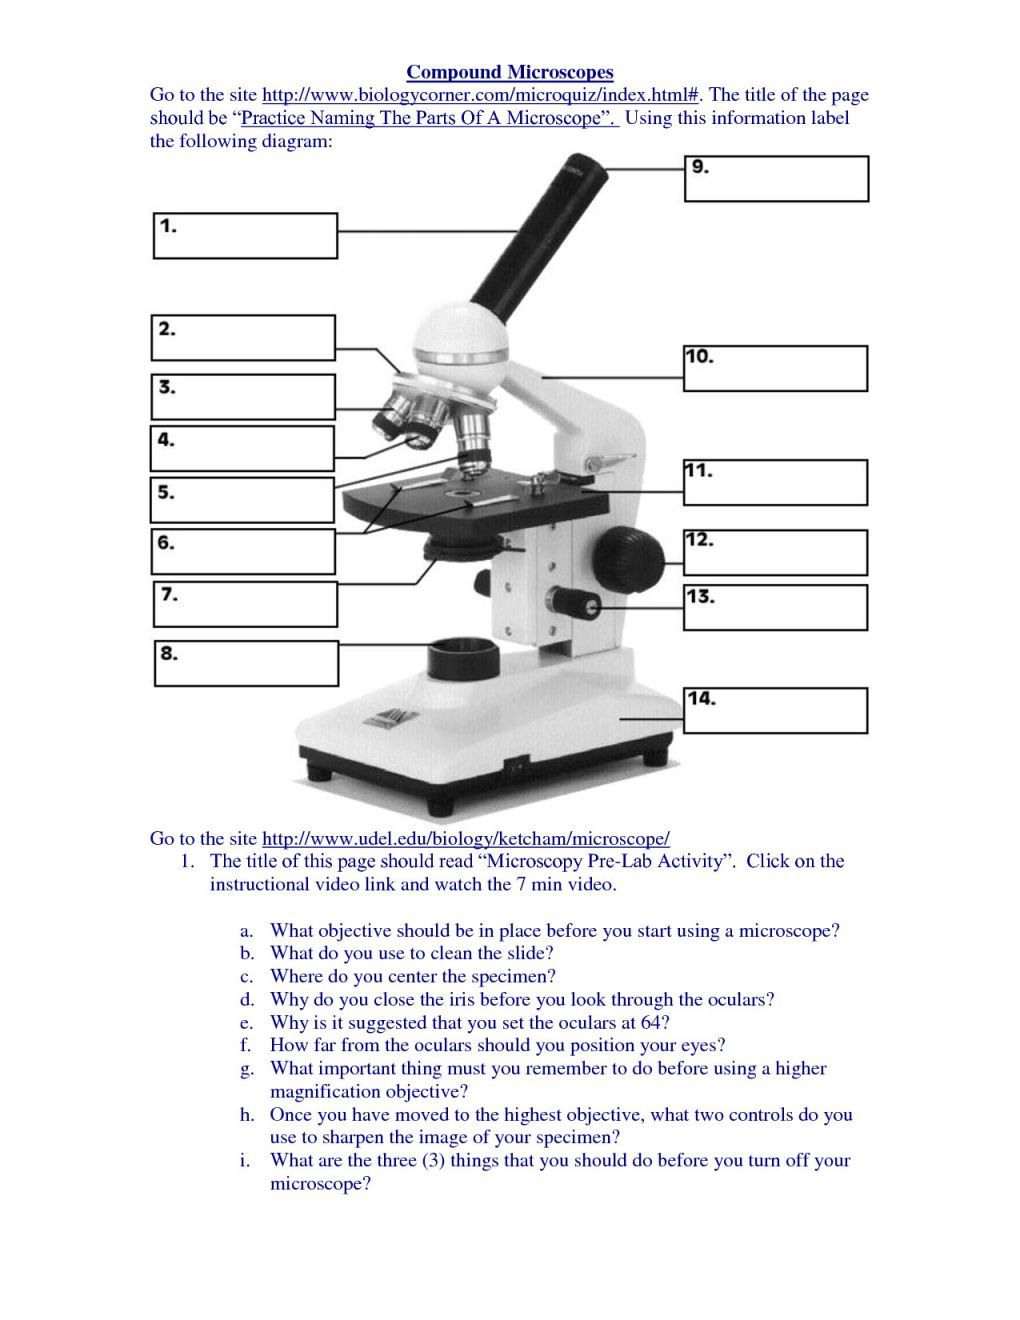 Parts Of A Microscope Worksheet Answers — db-excel.com